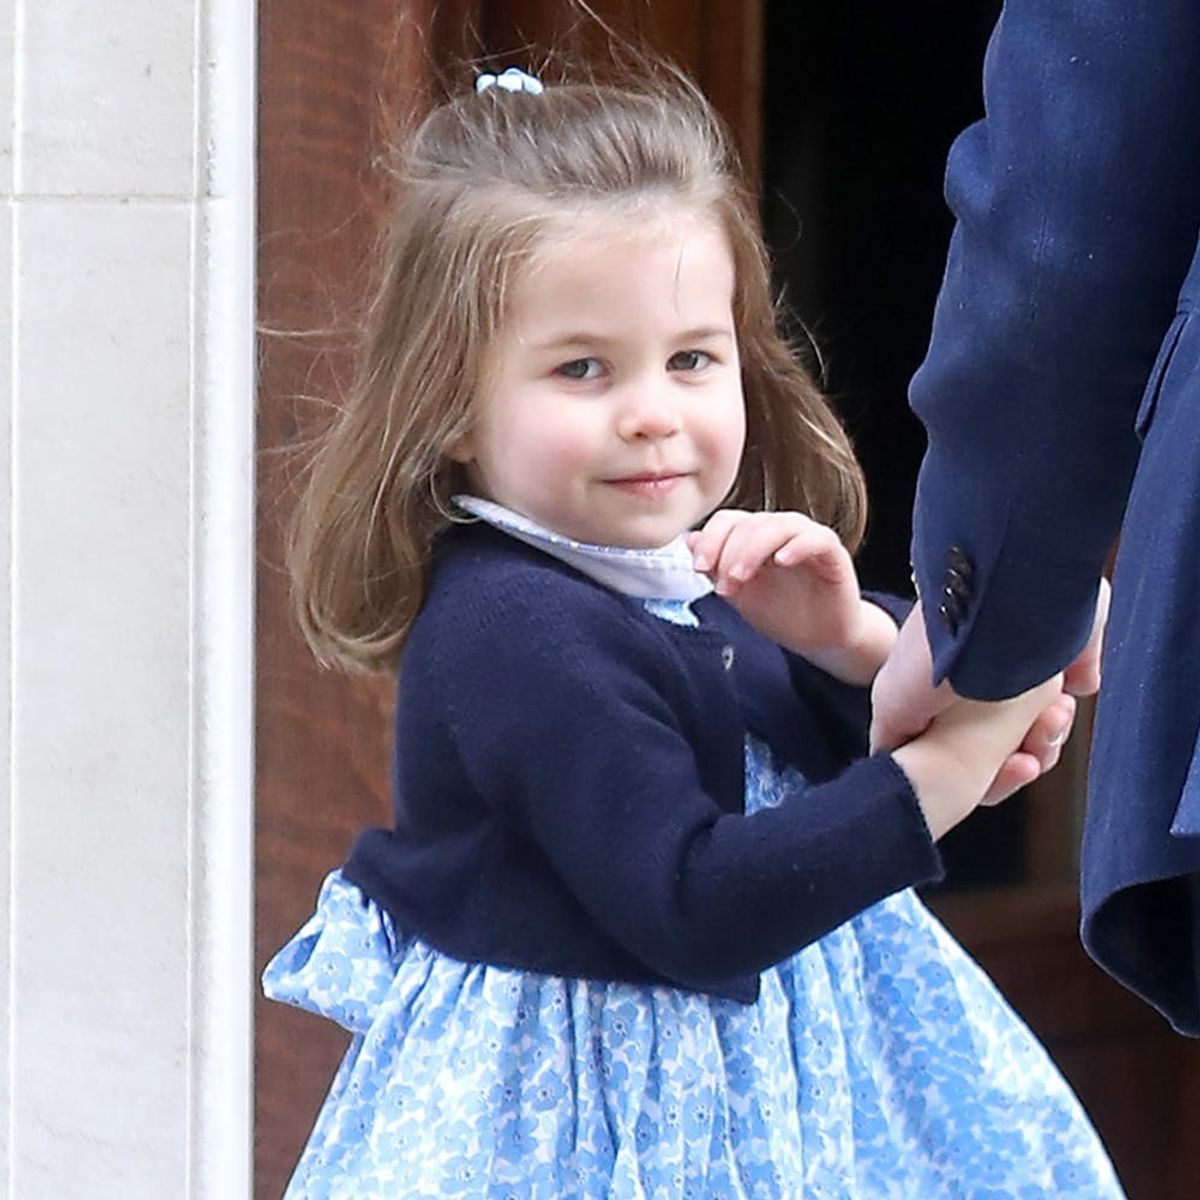 Prince George and Princess Charlotte Visited the Hospital to Meet Their Baby Brother